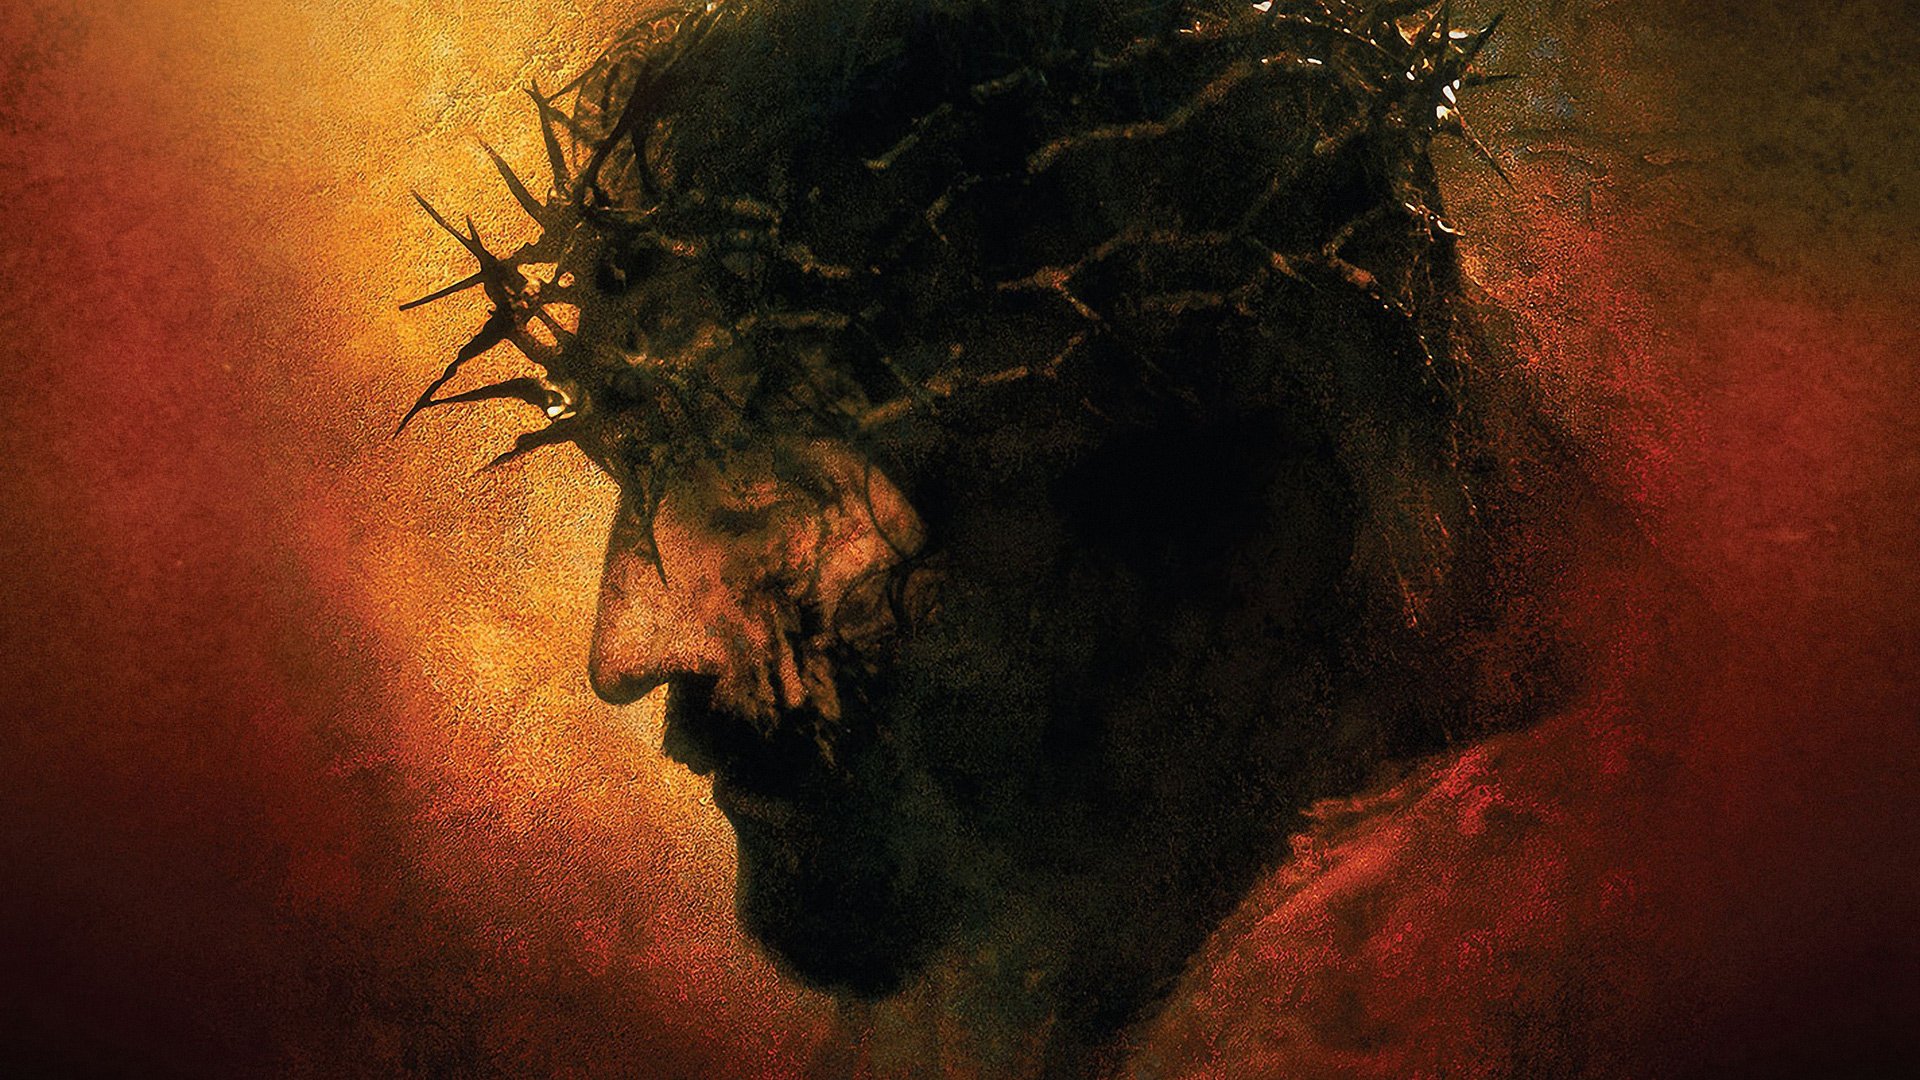 watch passion of the christ free streaming